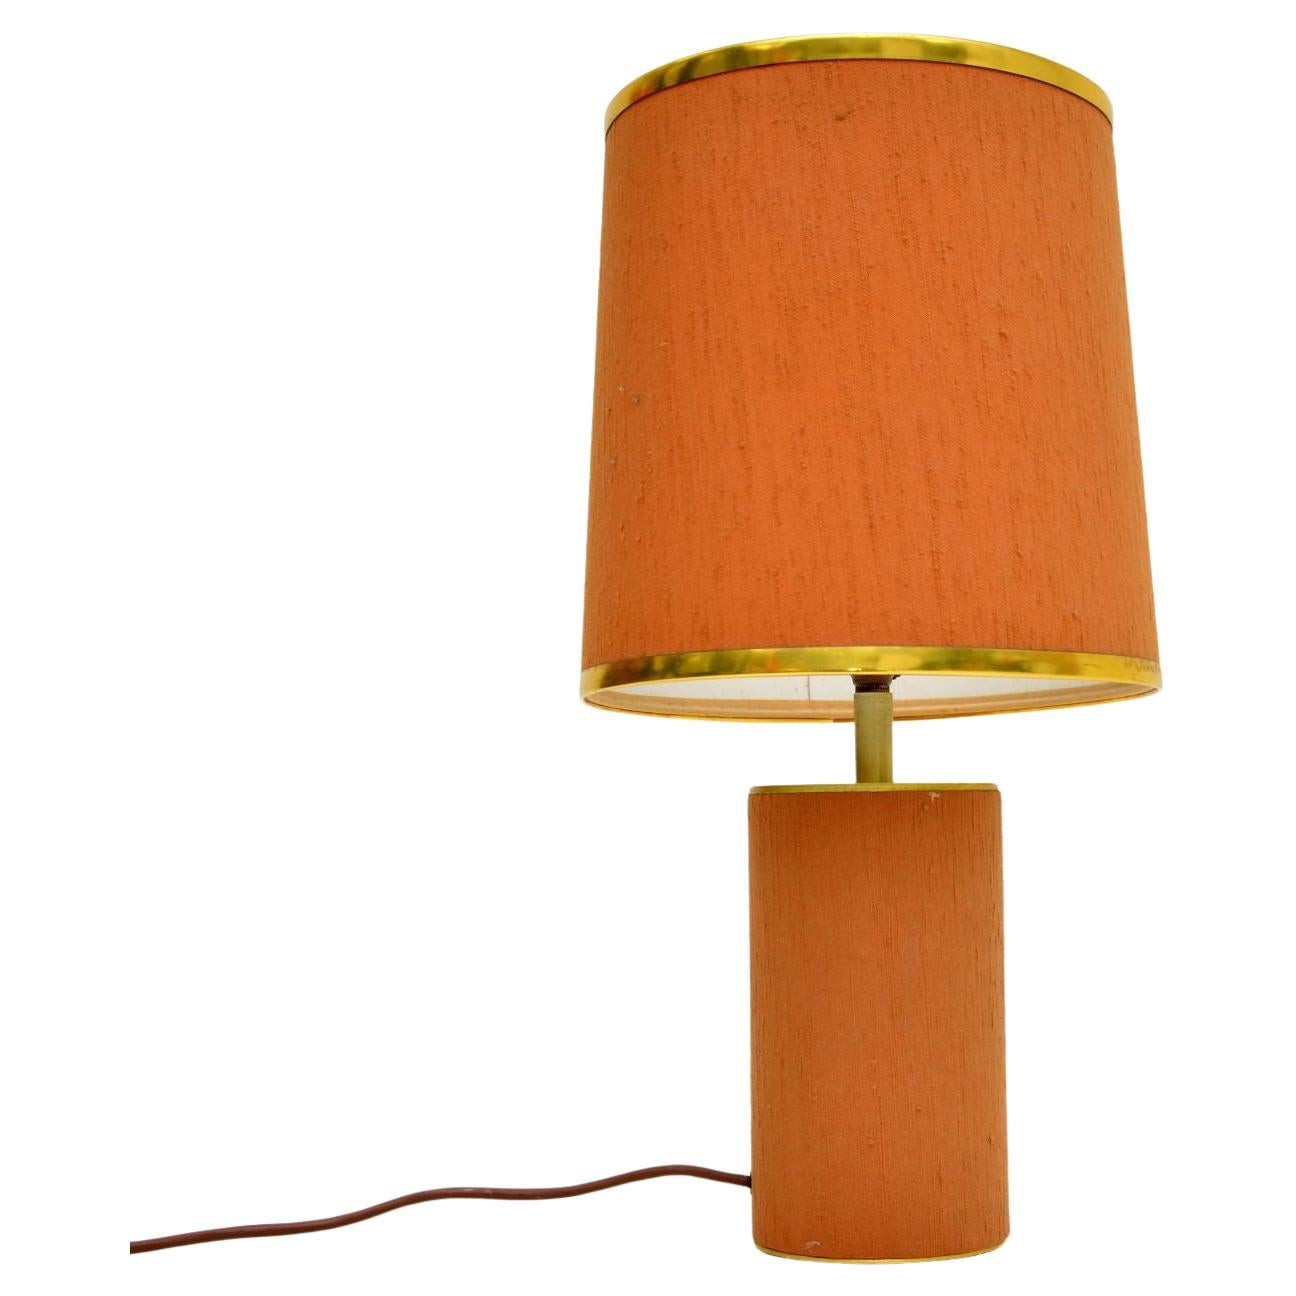 1970's, Vintage Table Lamp